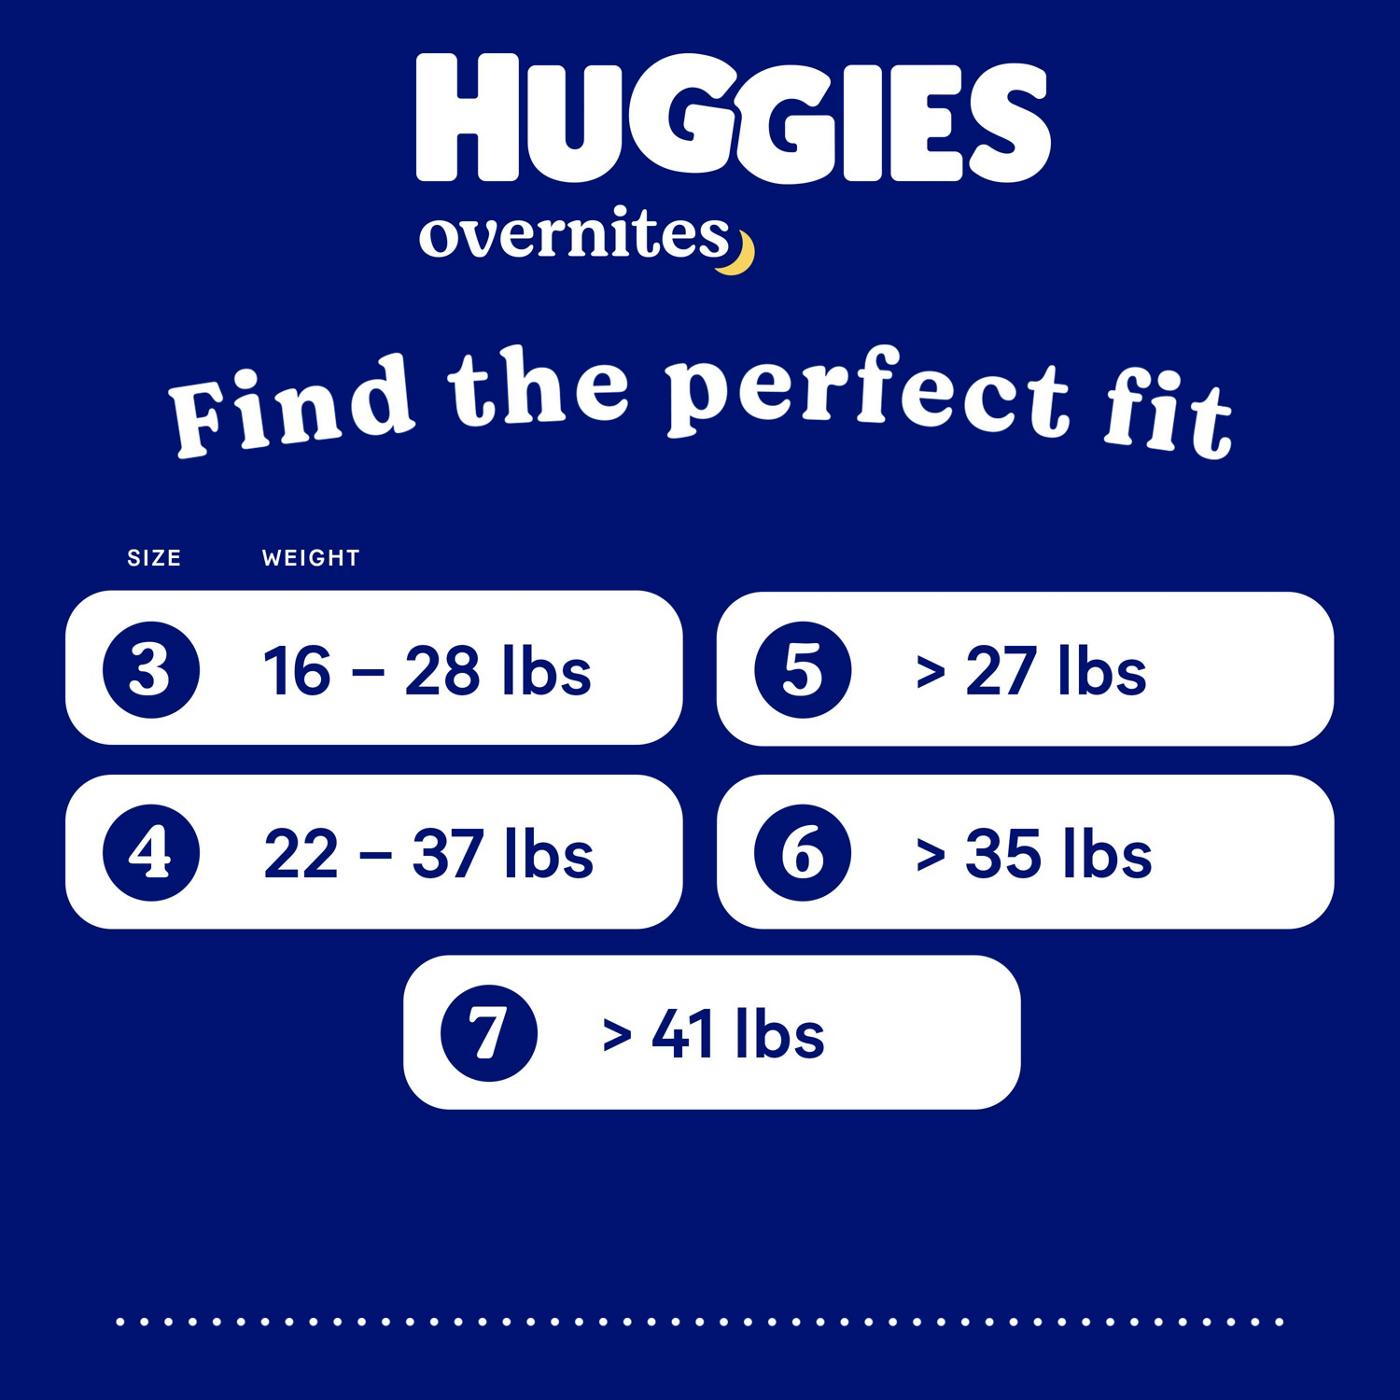 Huggies Overnites Nighttime Baby Diapers - Size 6; image 6 of 7